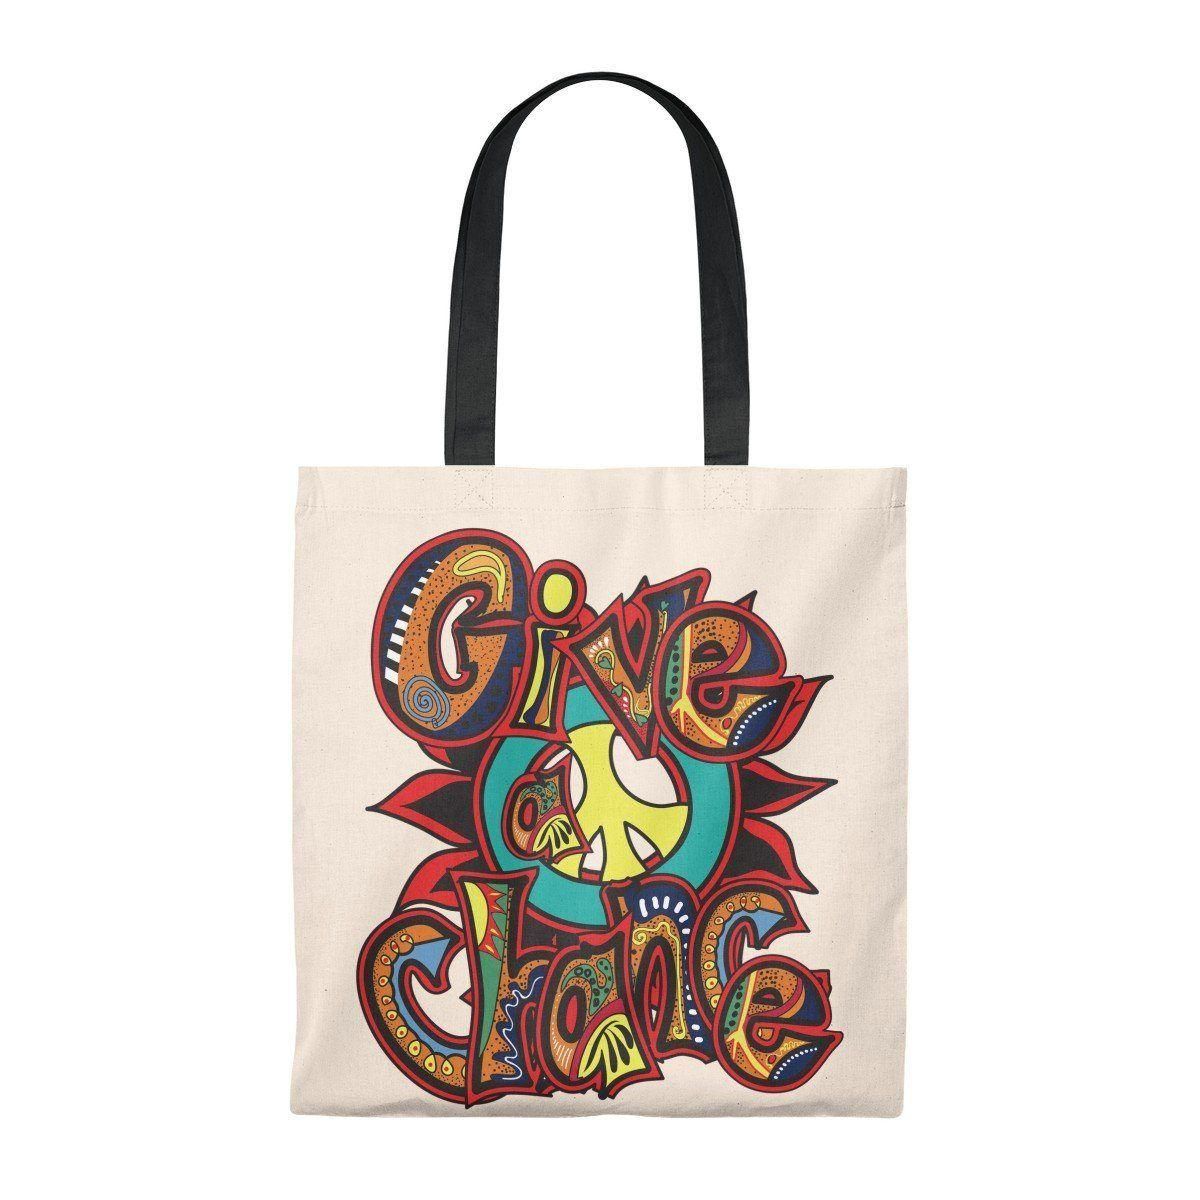 Give Peace A Chance Printed Tote Bag